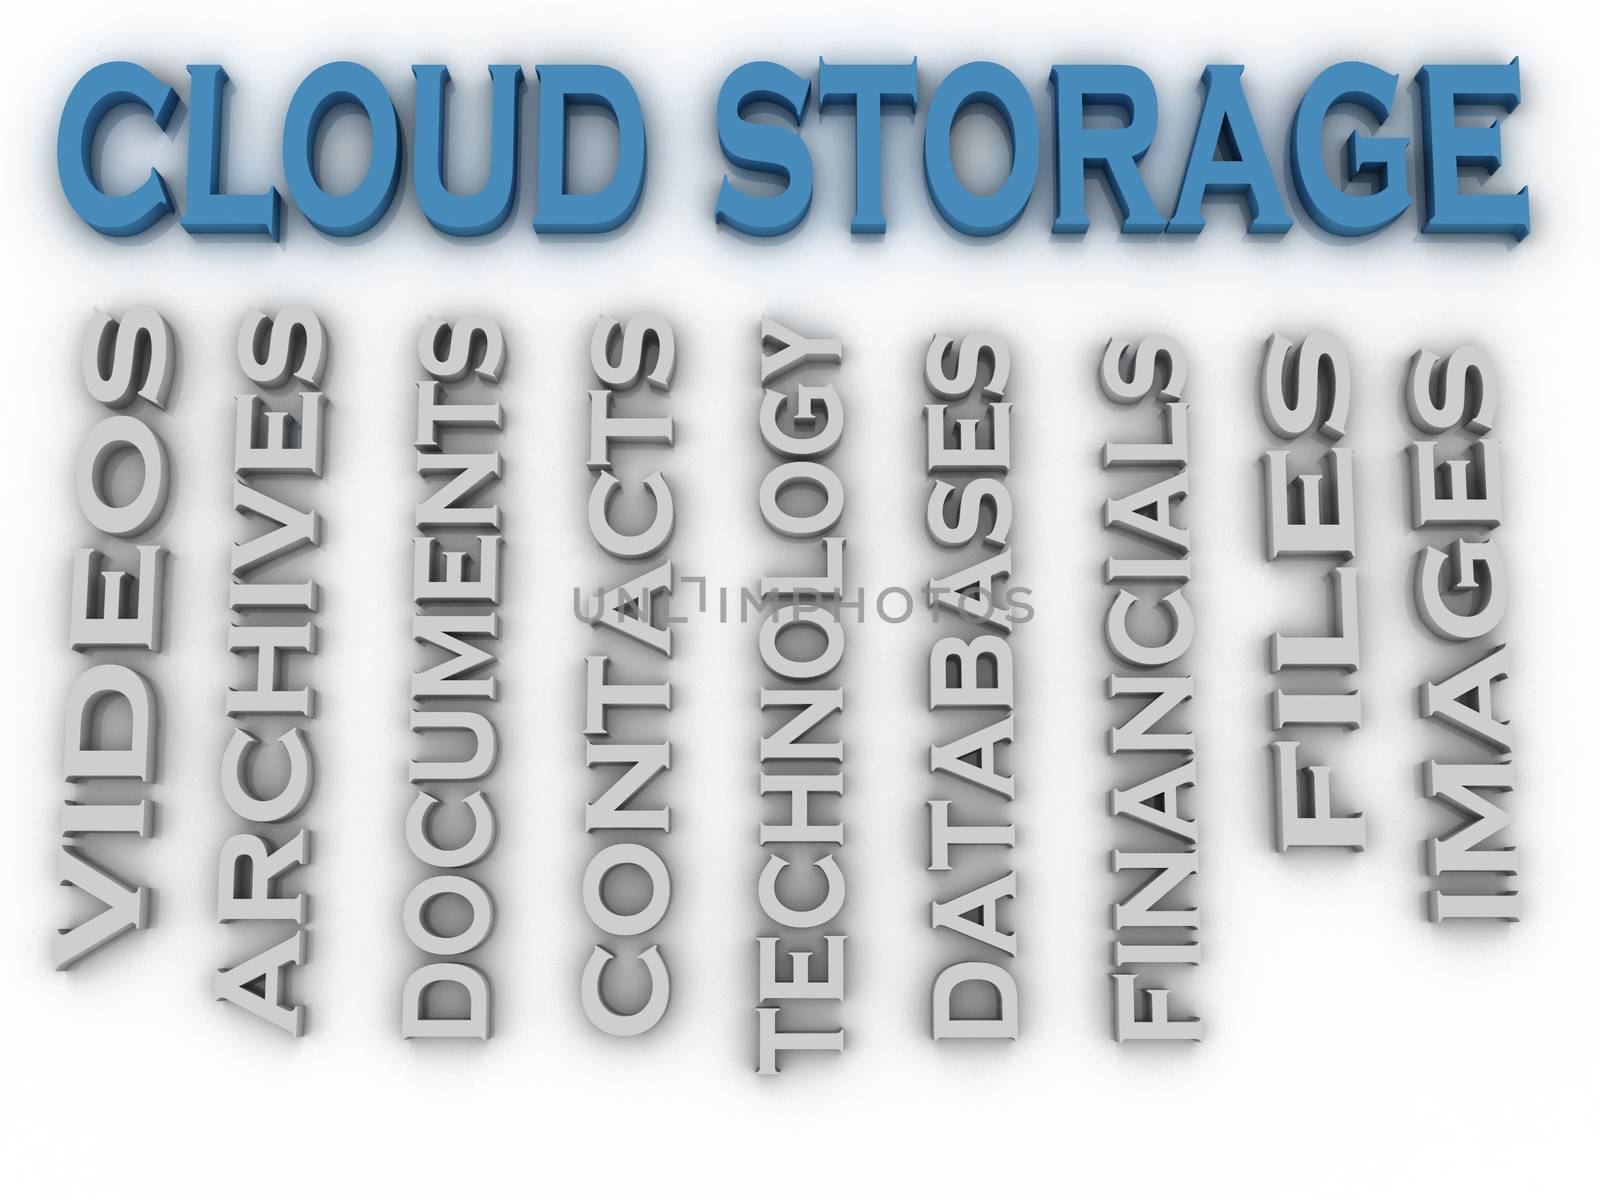 3d image Cloud storage issues concept word cloud background by dacasdo